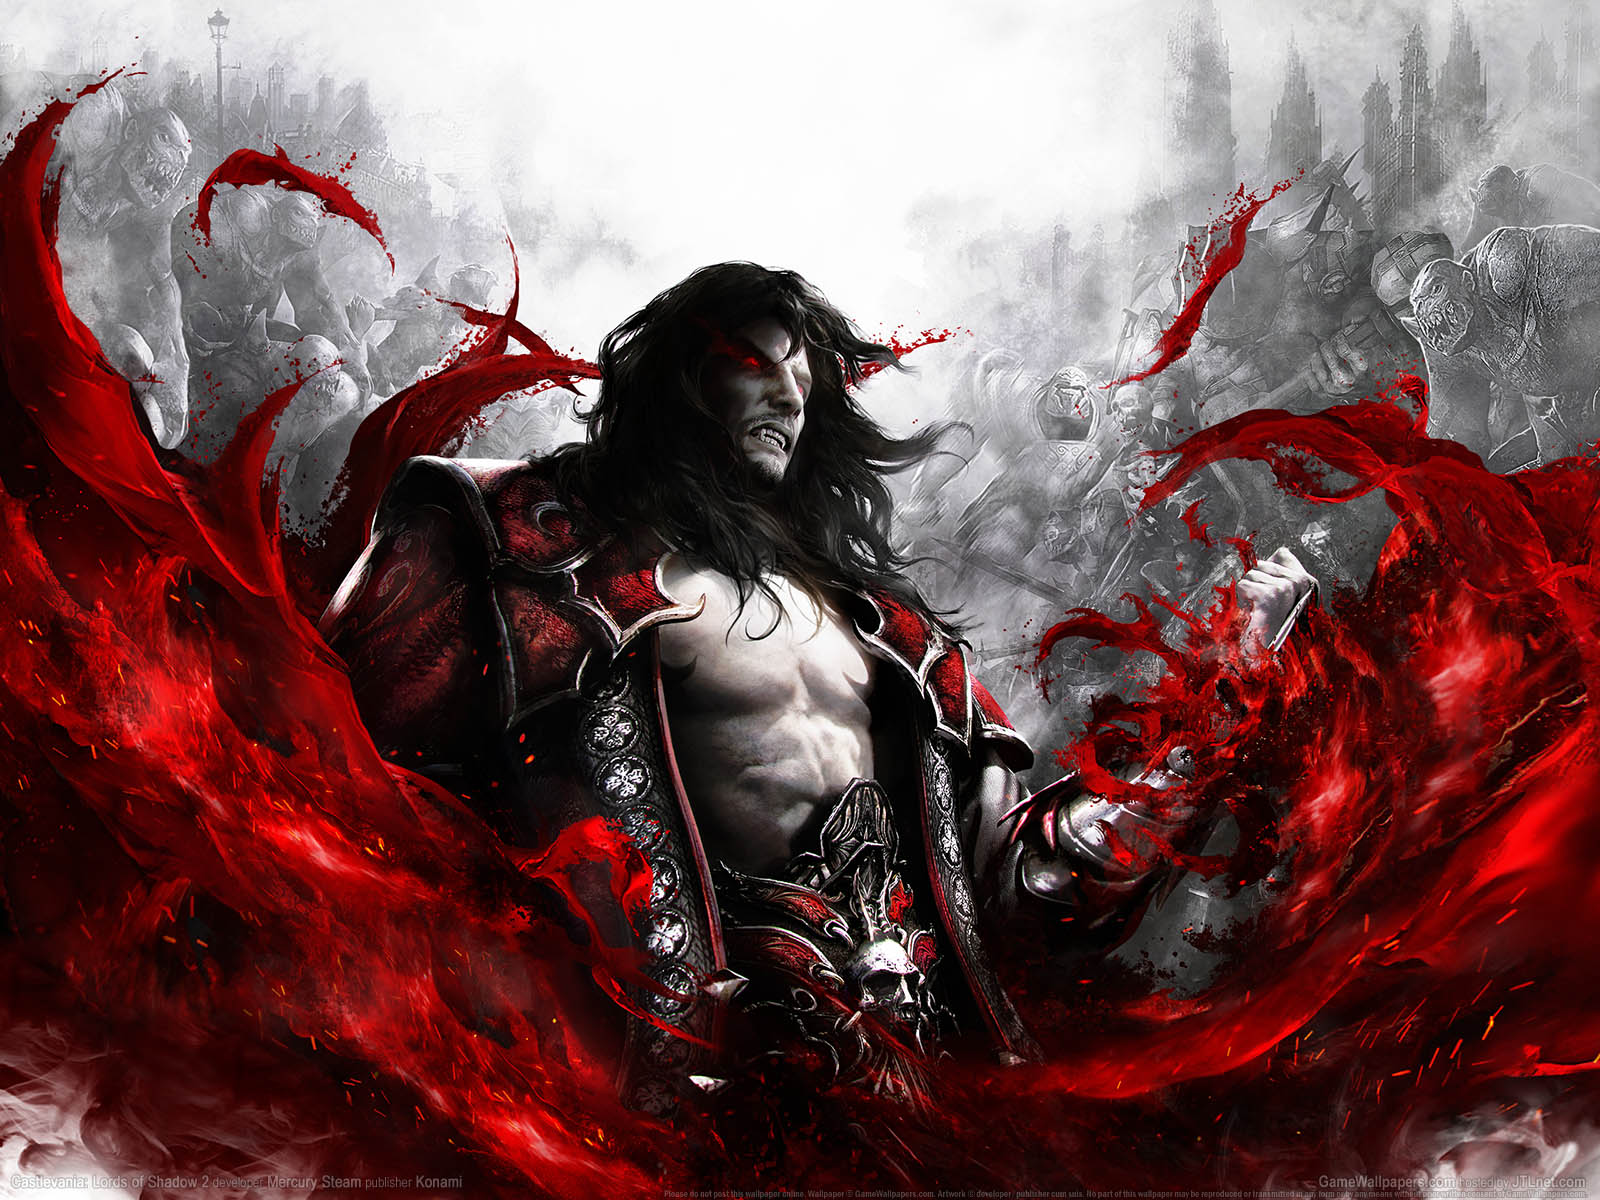 Castlevania%253A Lords of Shadow 2 achtergrond 03 1600x1200